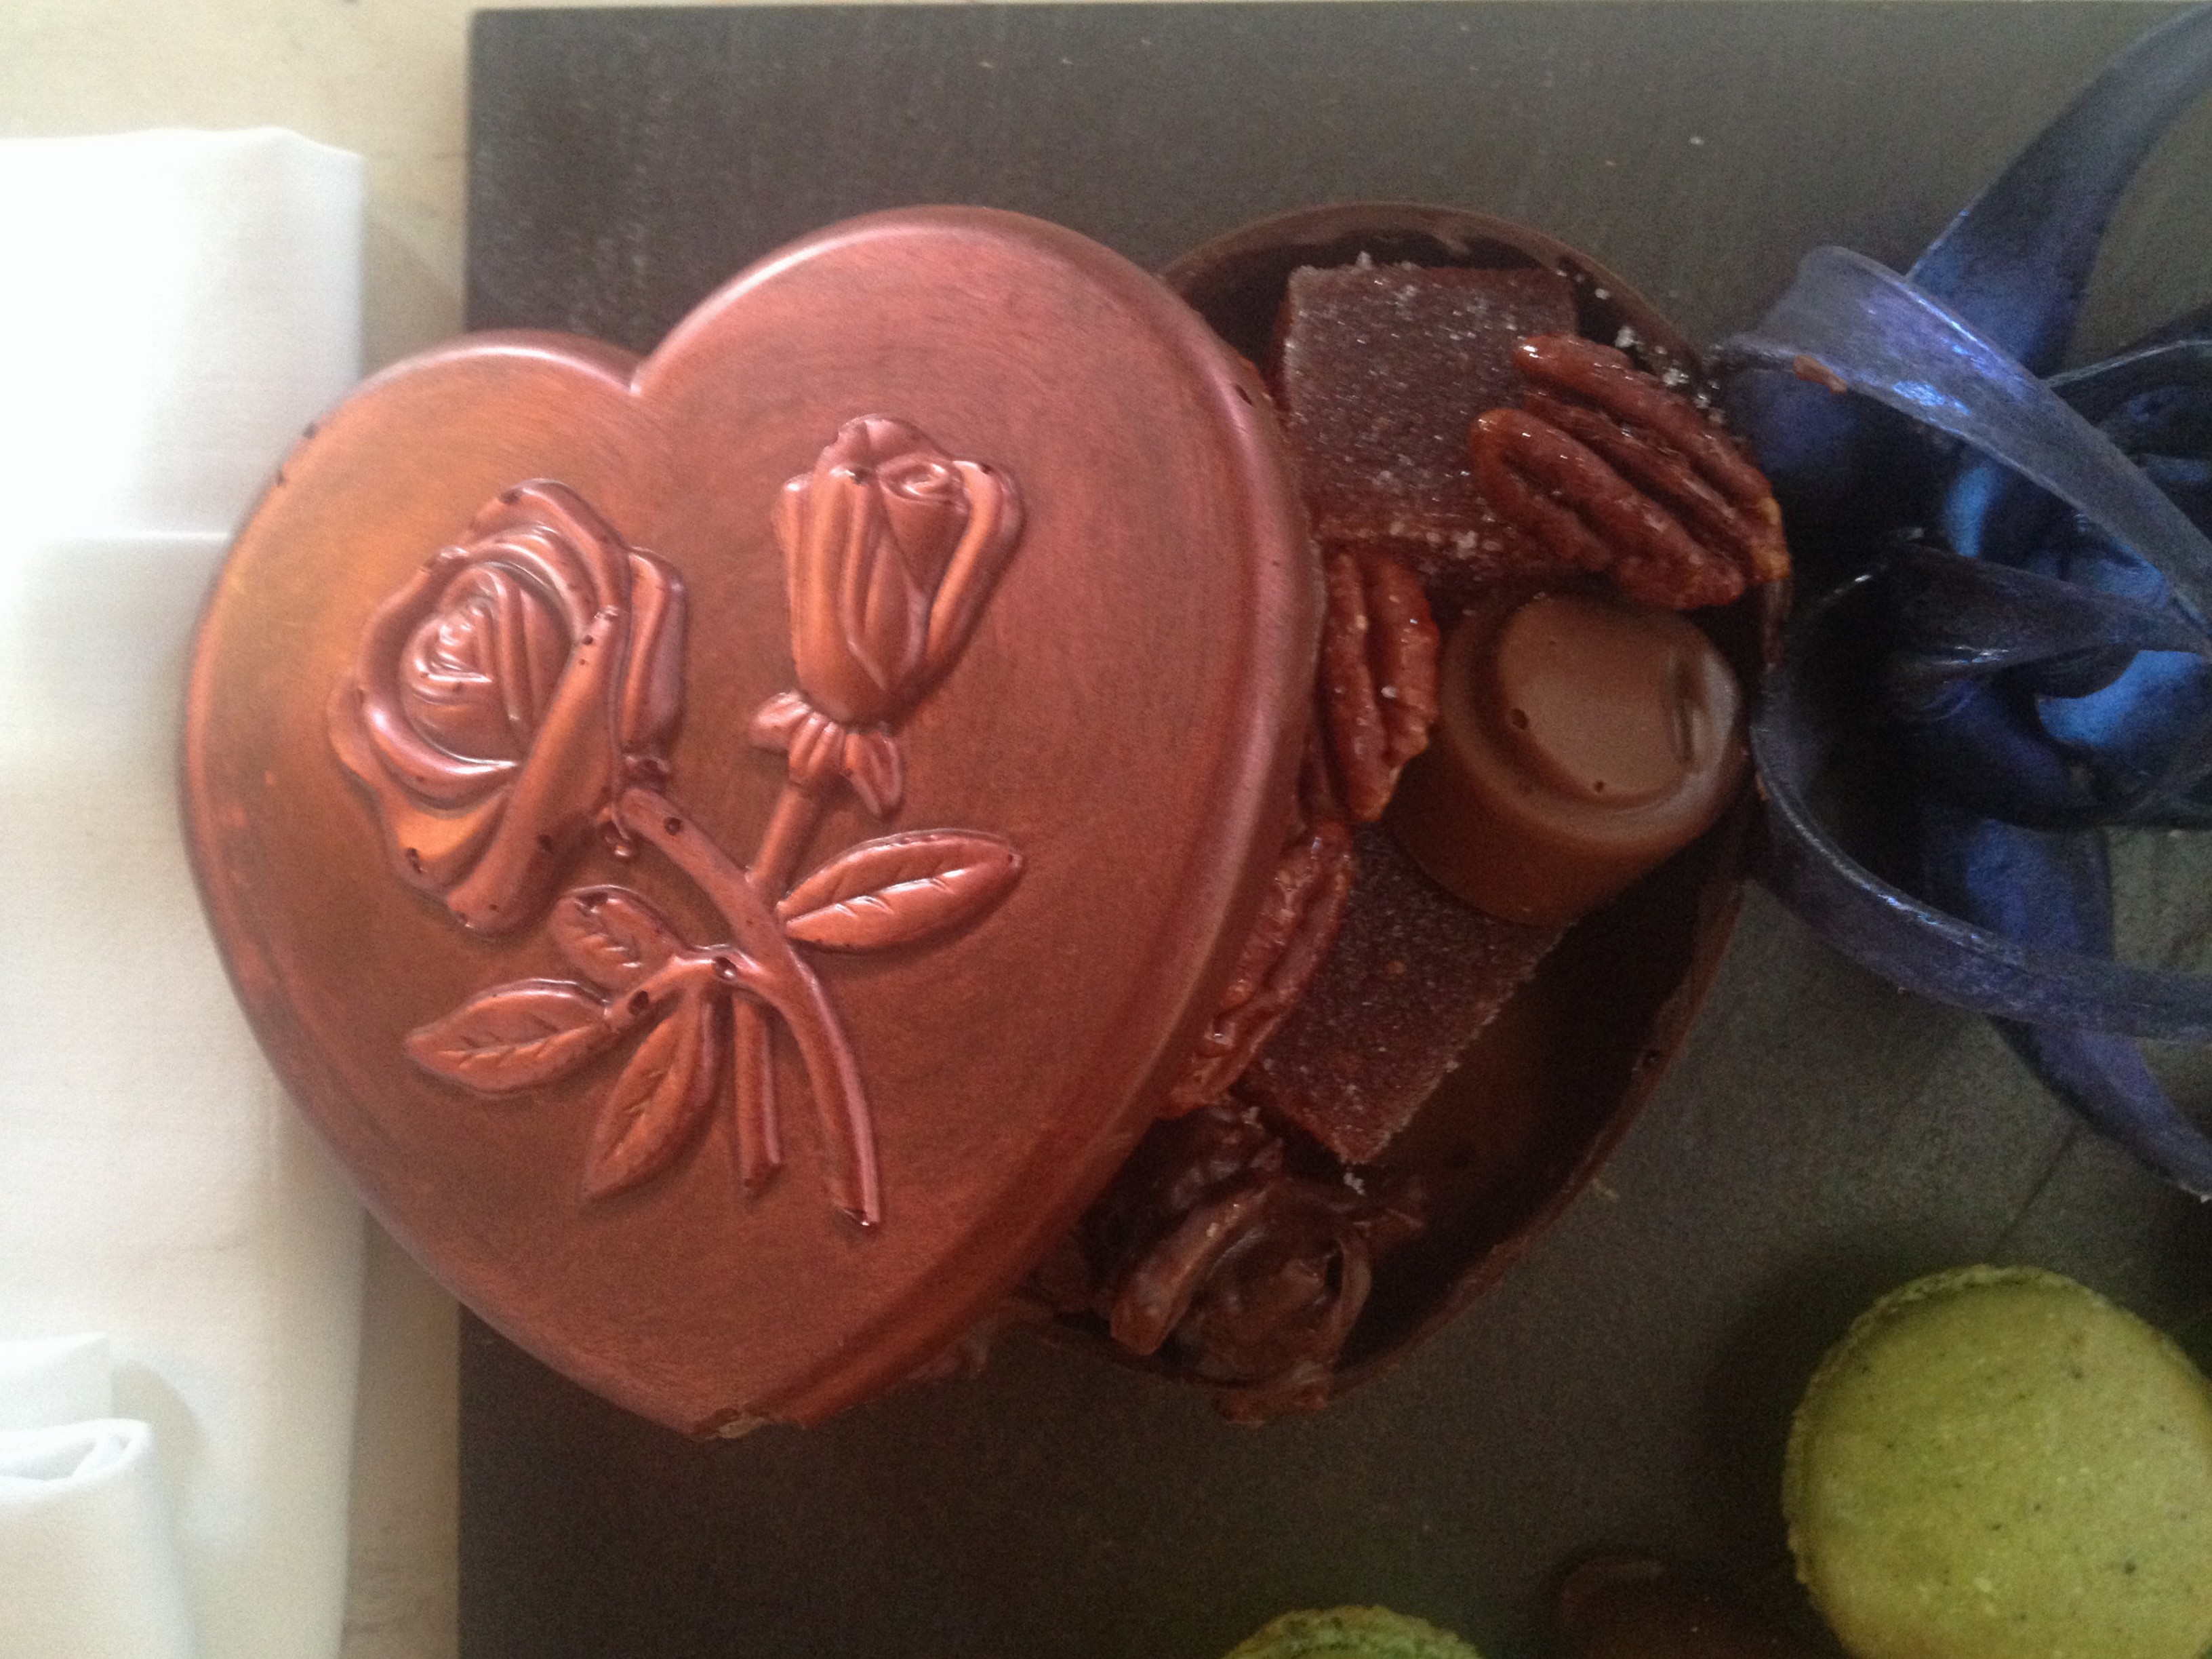 Heart-shaped box made out of chocolate